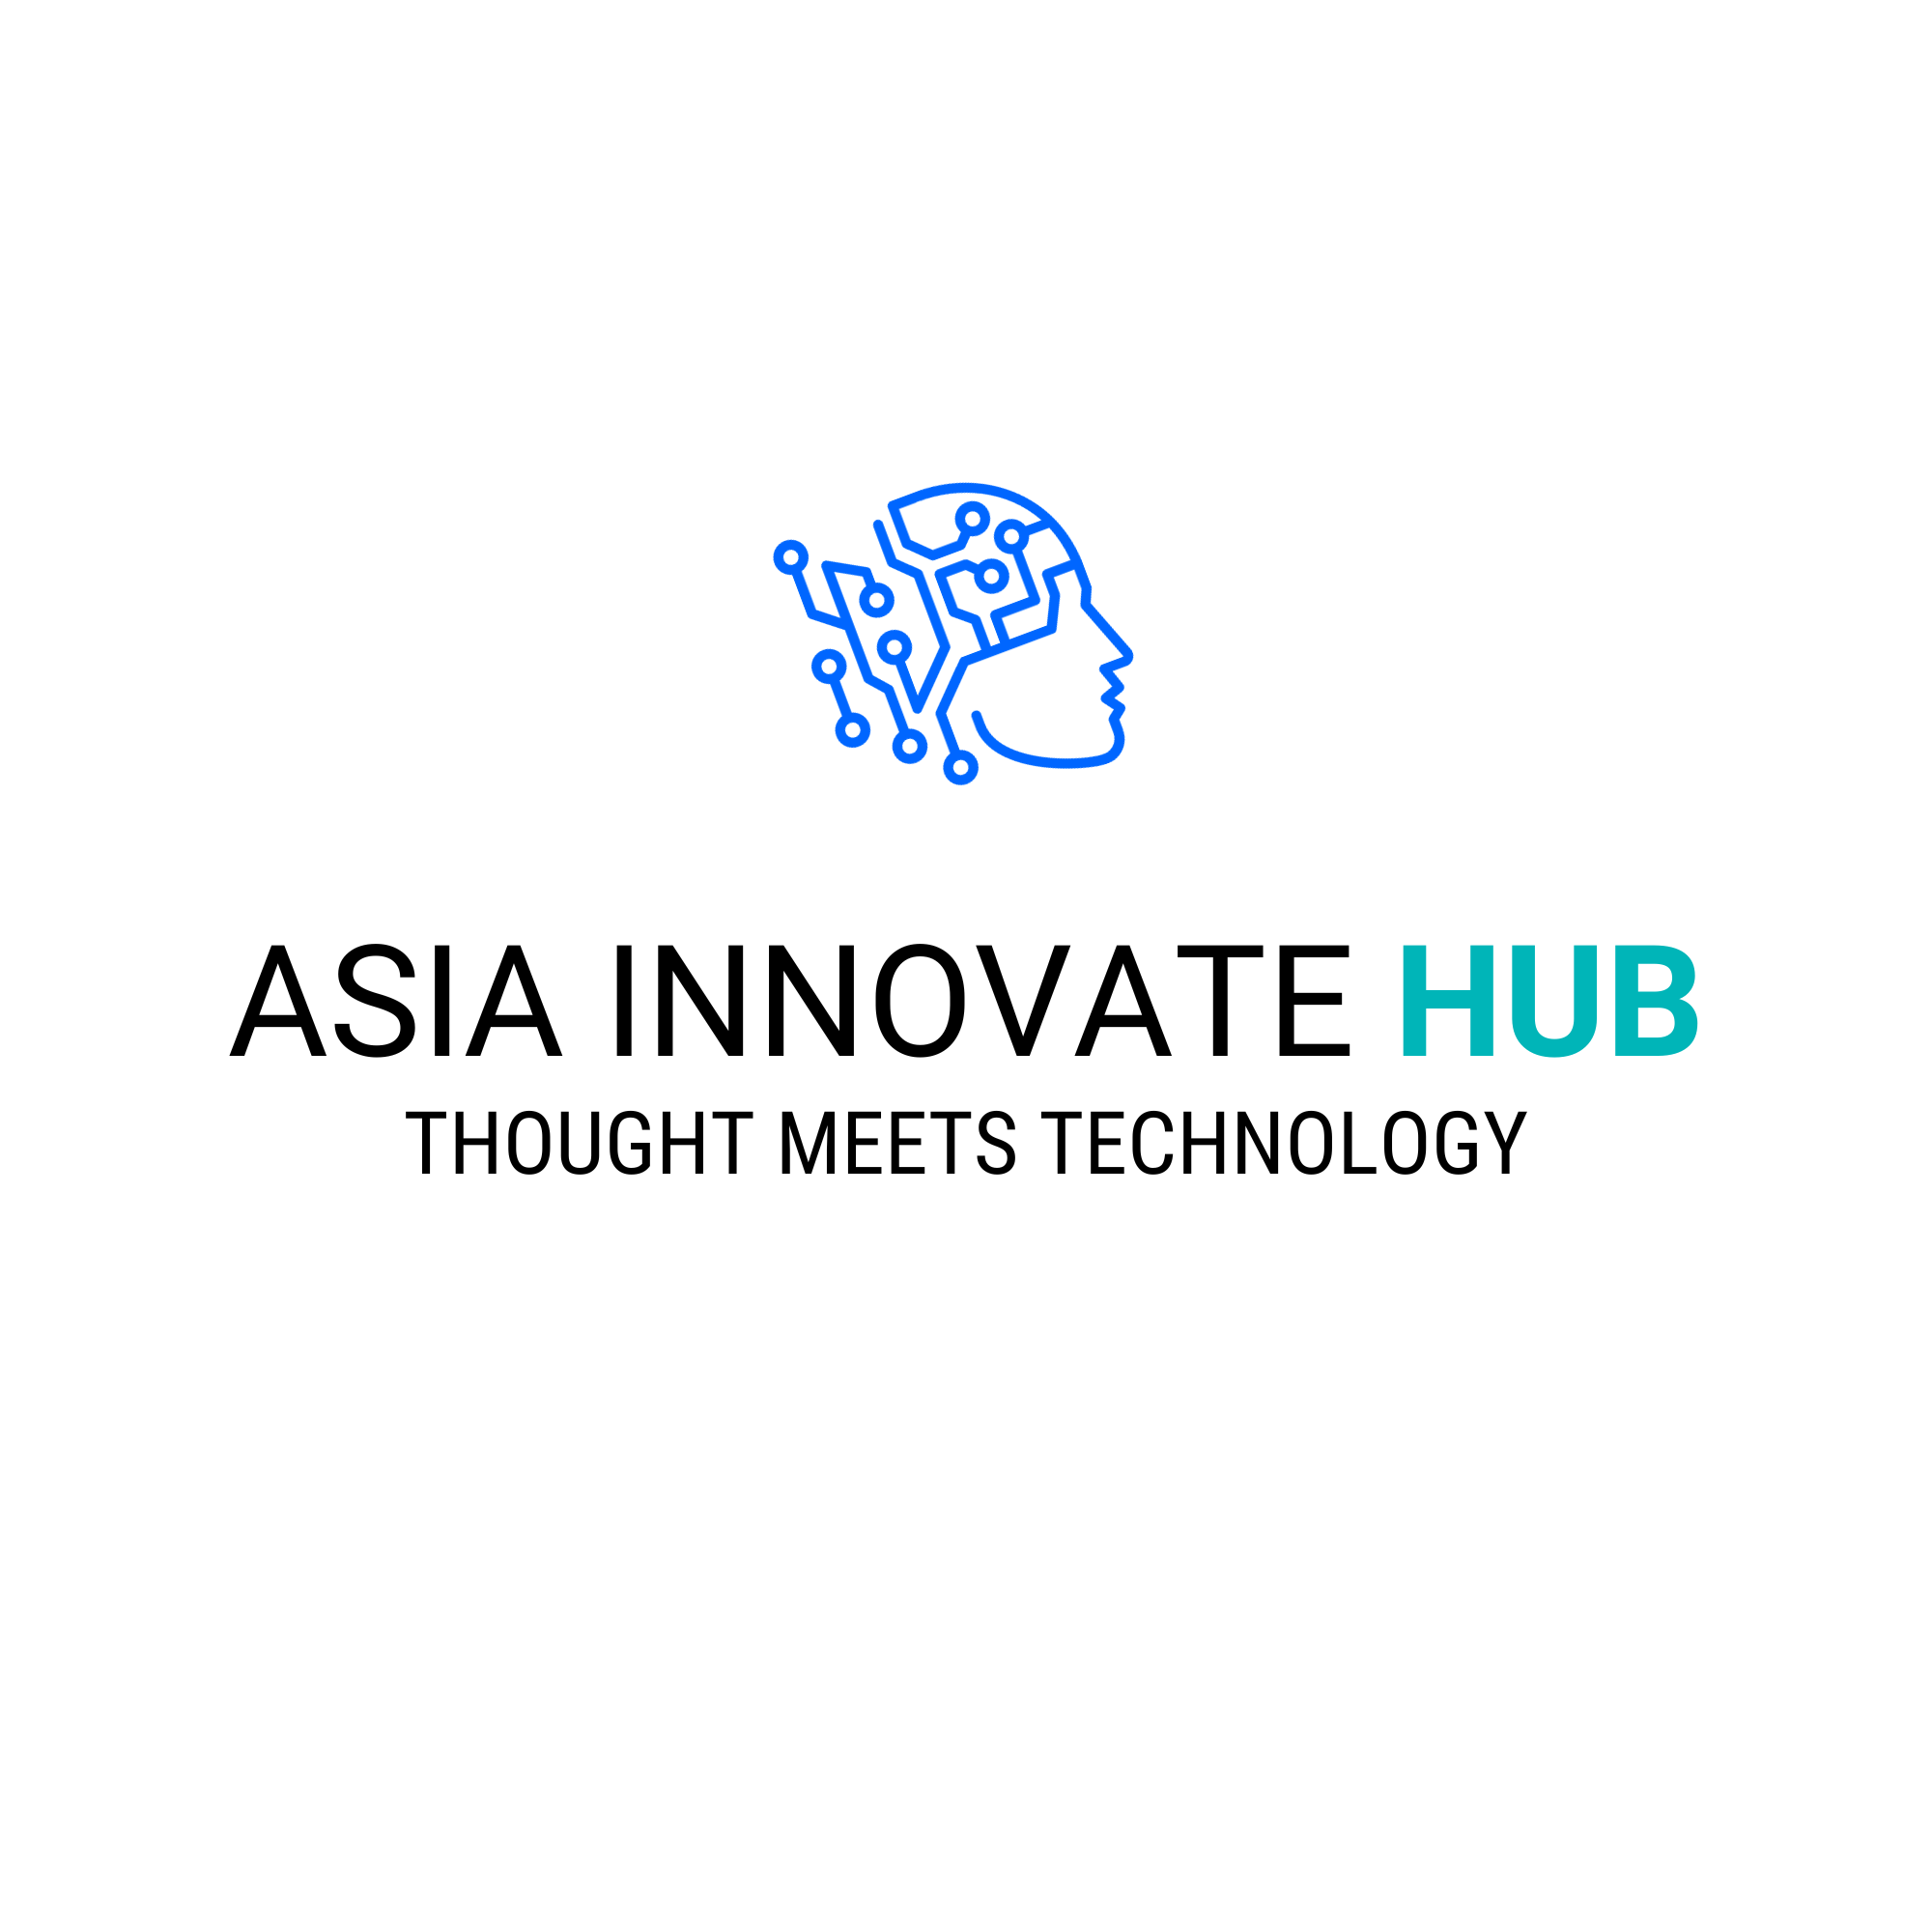 Asia Innovate Hub Curated News for the week of January 24th to January 31st